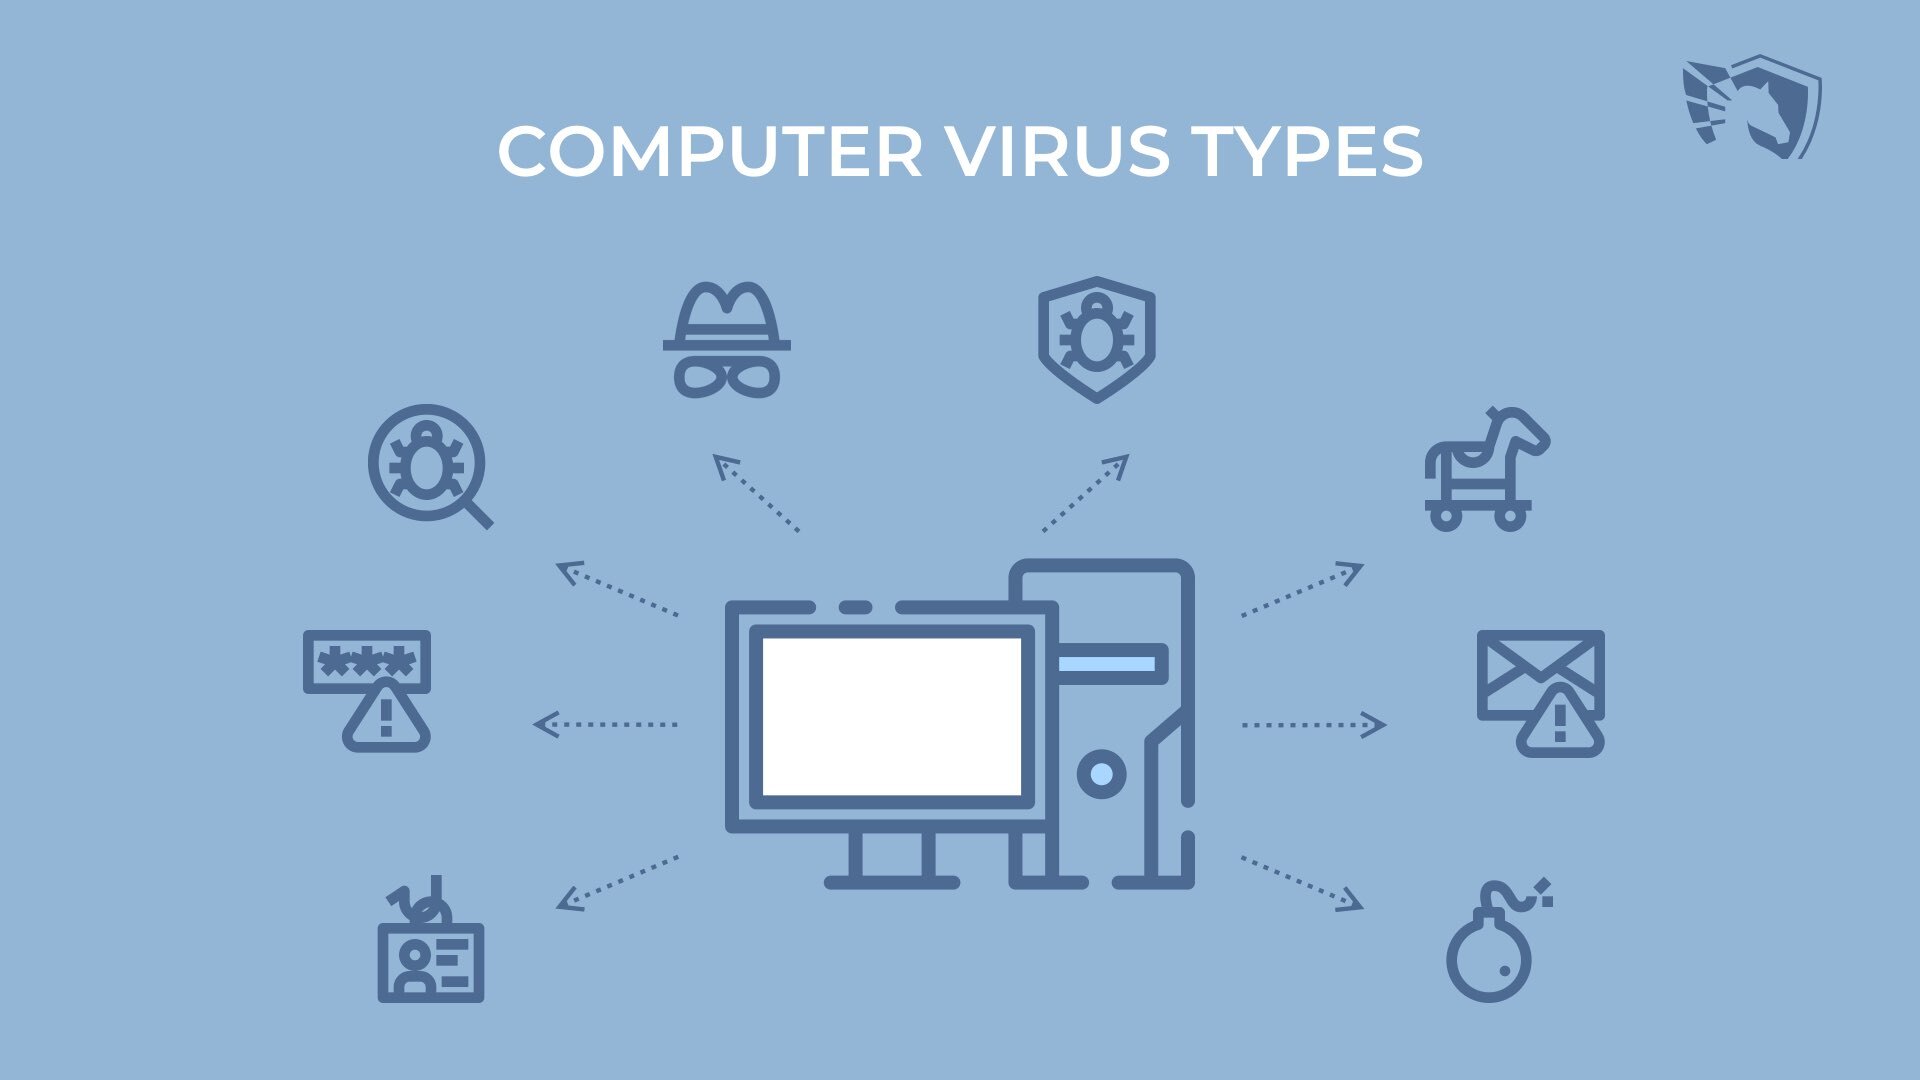 Computer virus types. How many types of computer viruses exist?